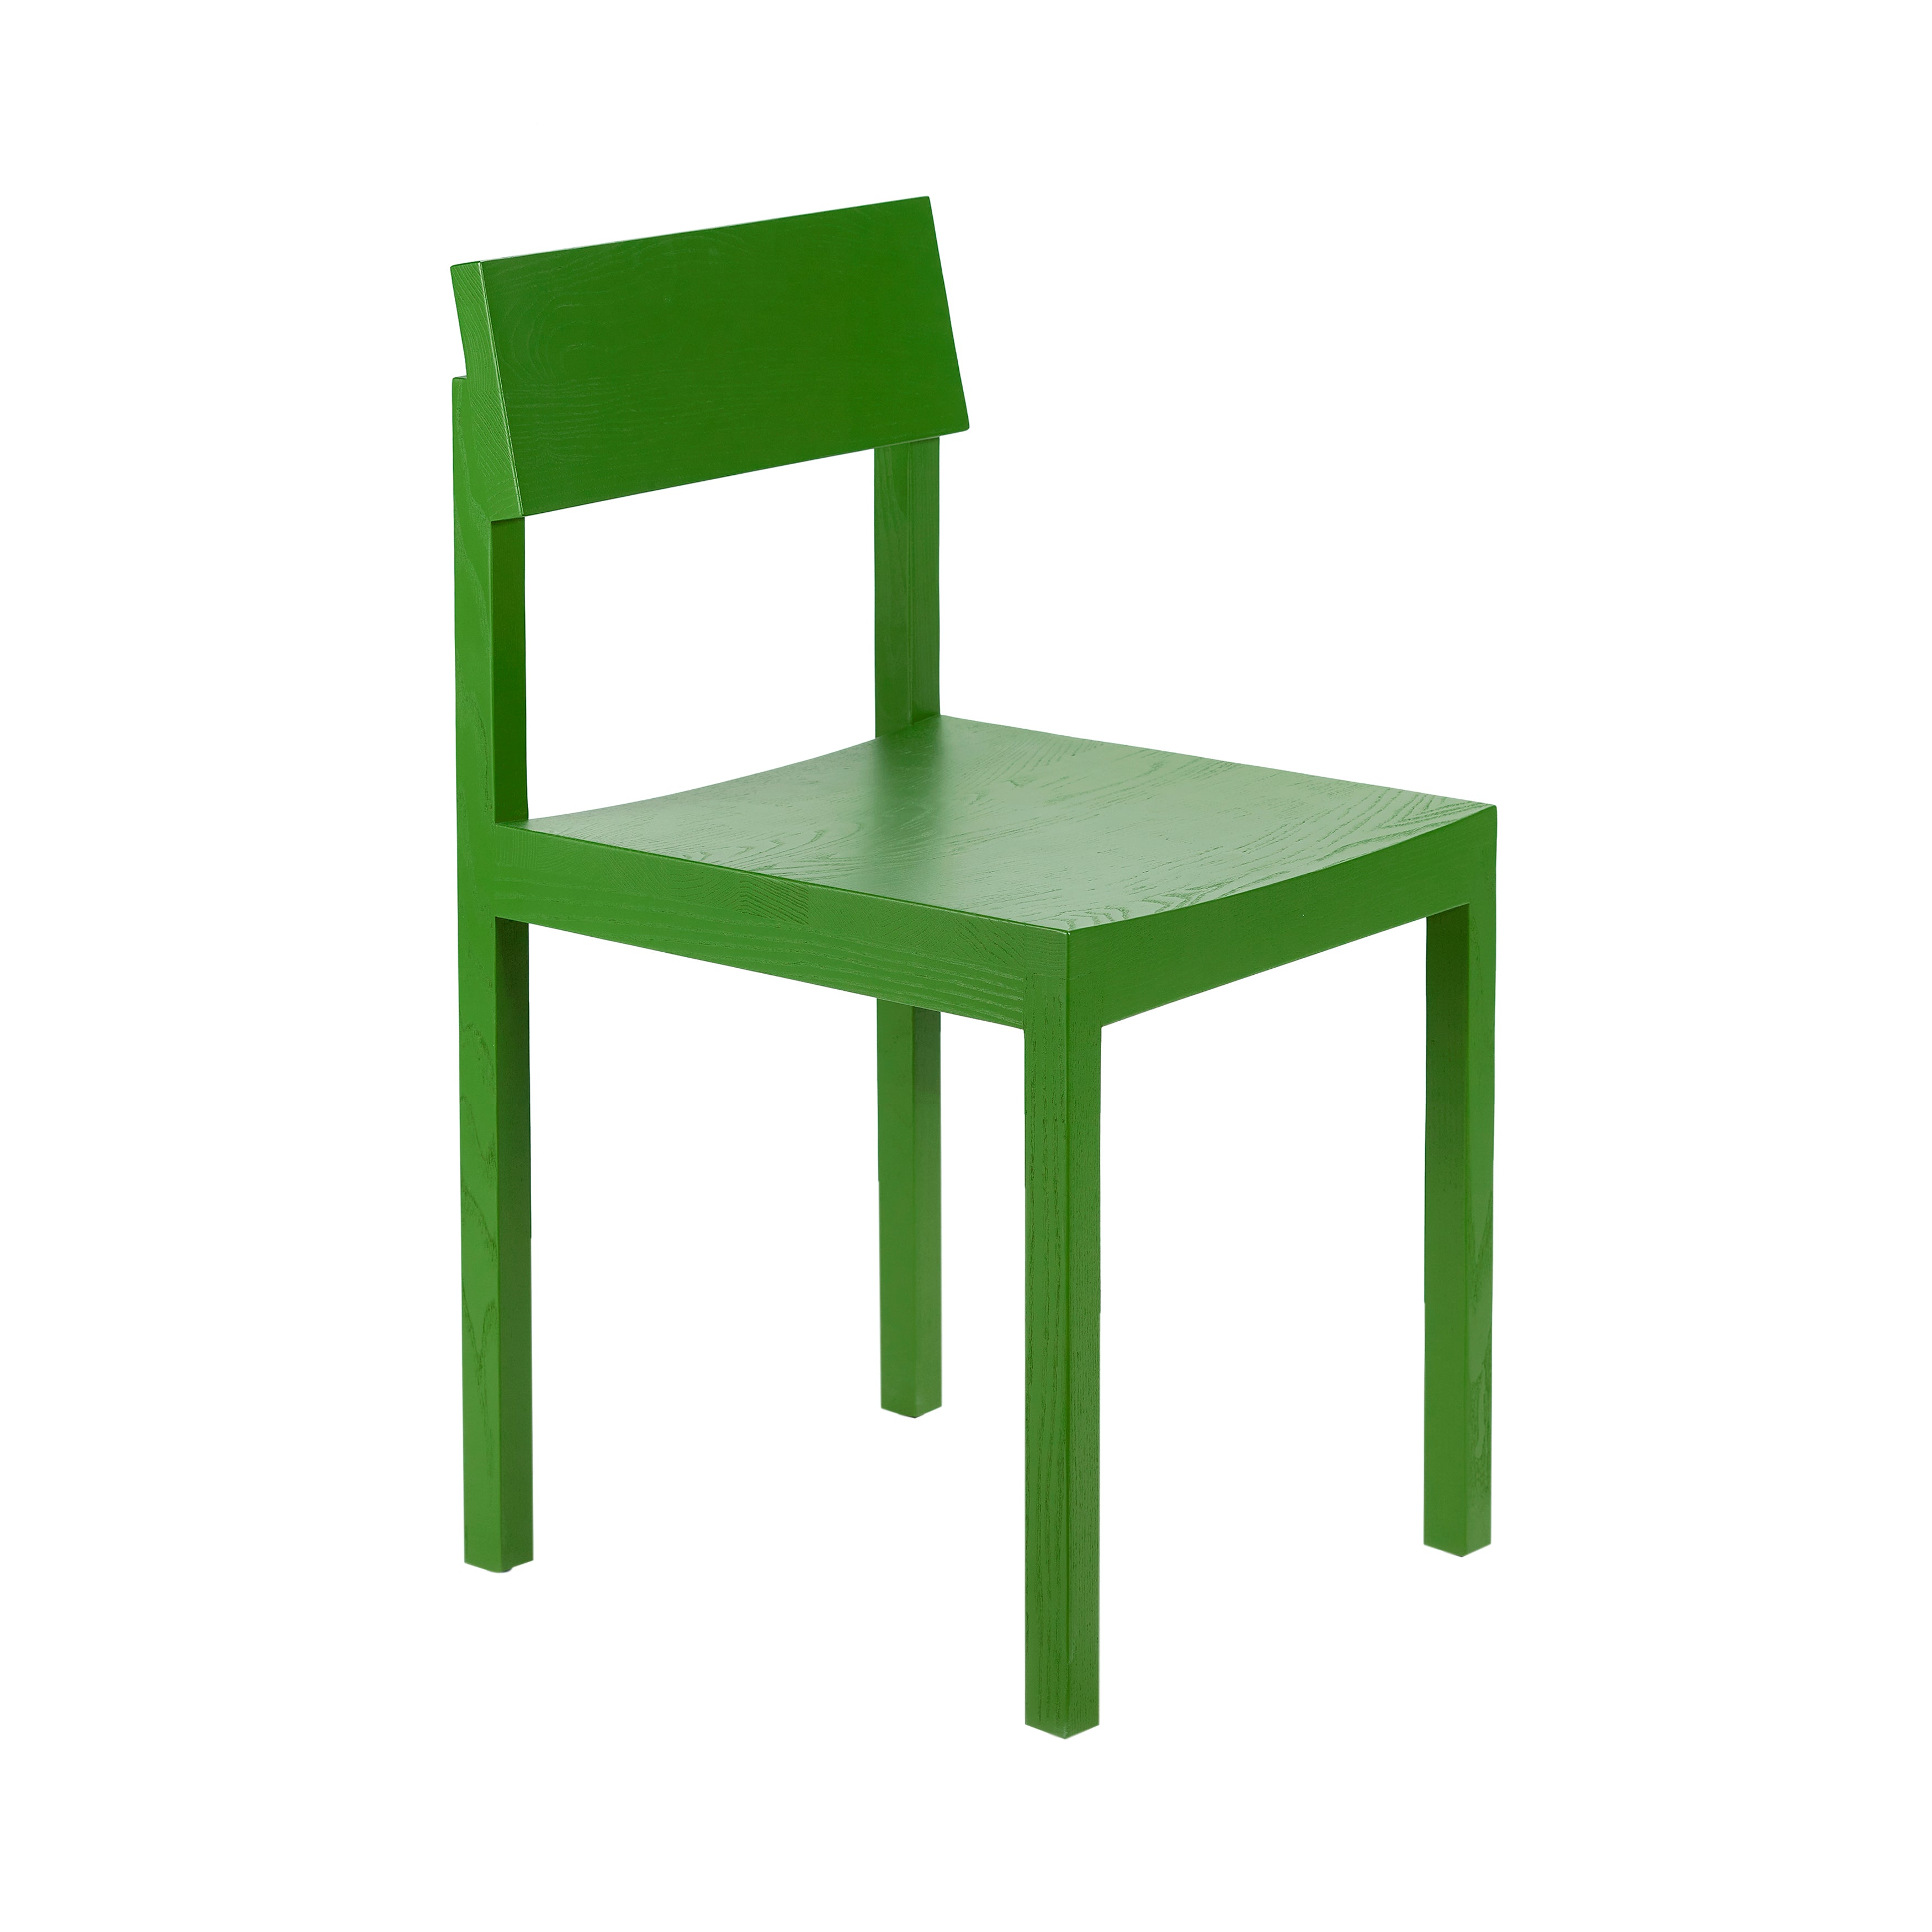 Silent Chair: Without Arm + Grass